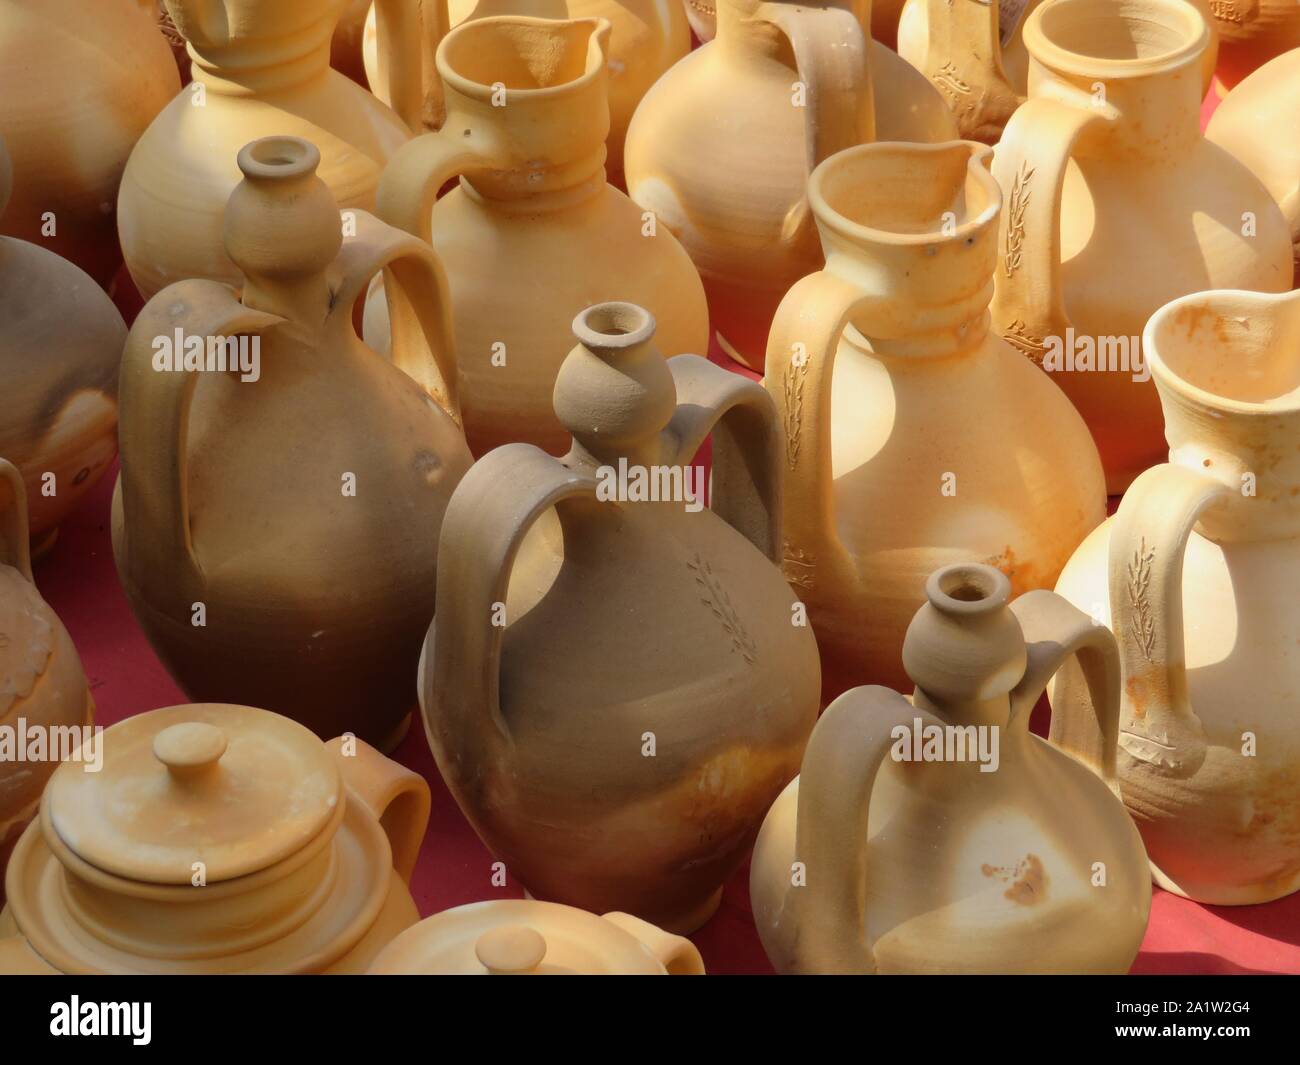 Beautiful kitchen utensils made of clay by hand by expert hands Stock Photo  - Alamy